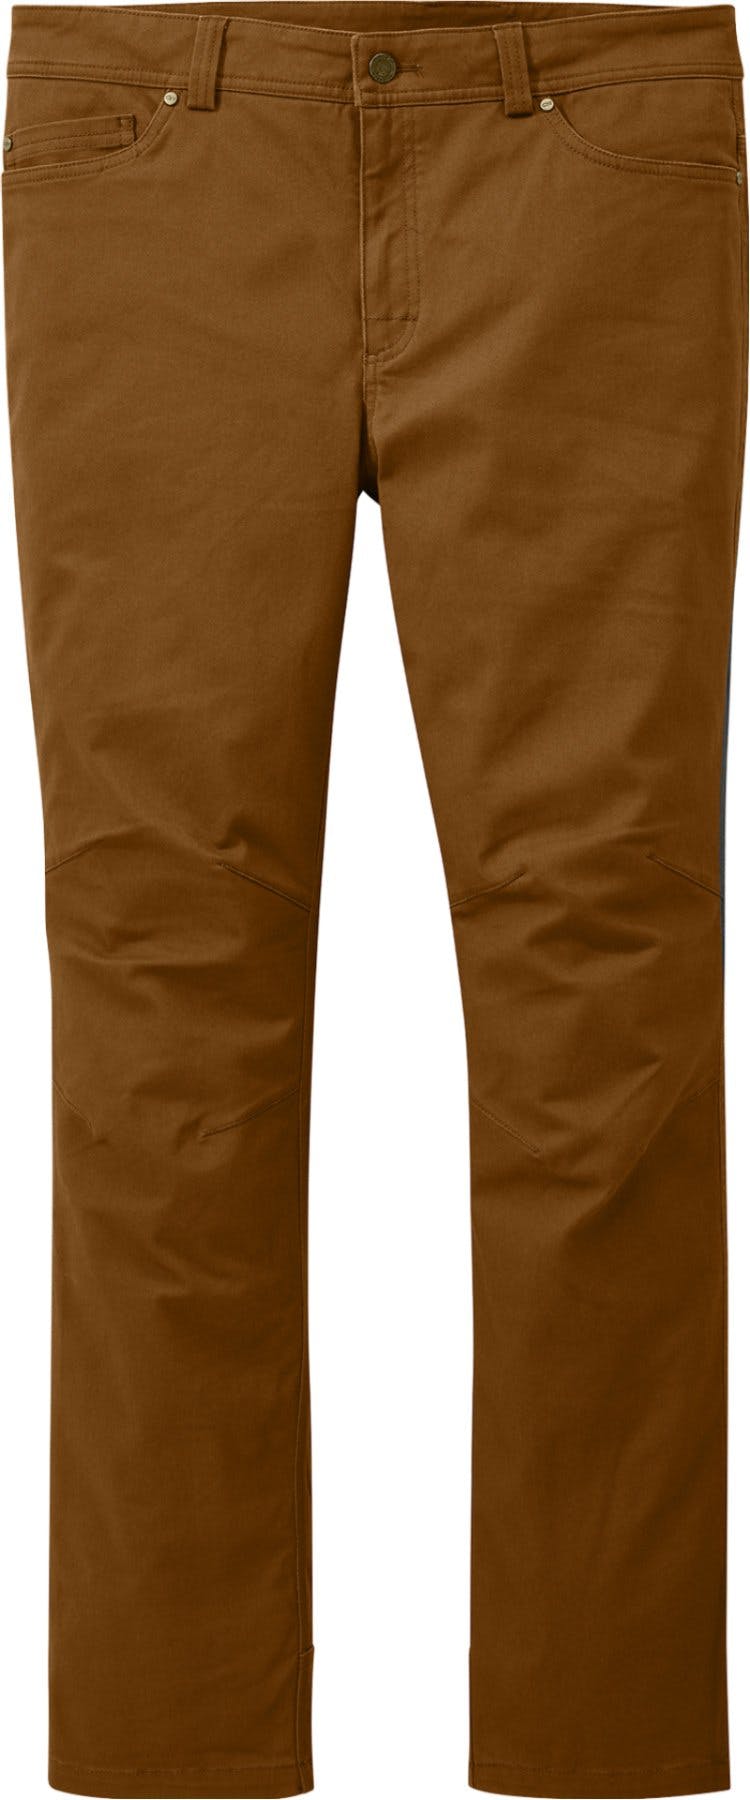 Product image for Goldbar Pants 30 in. - Men's